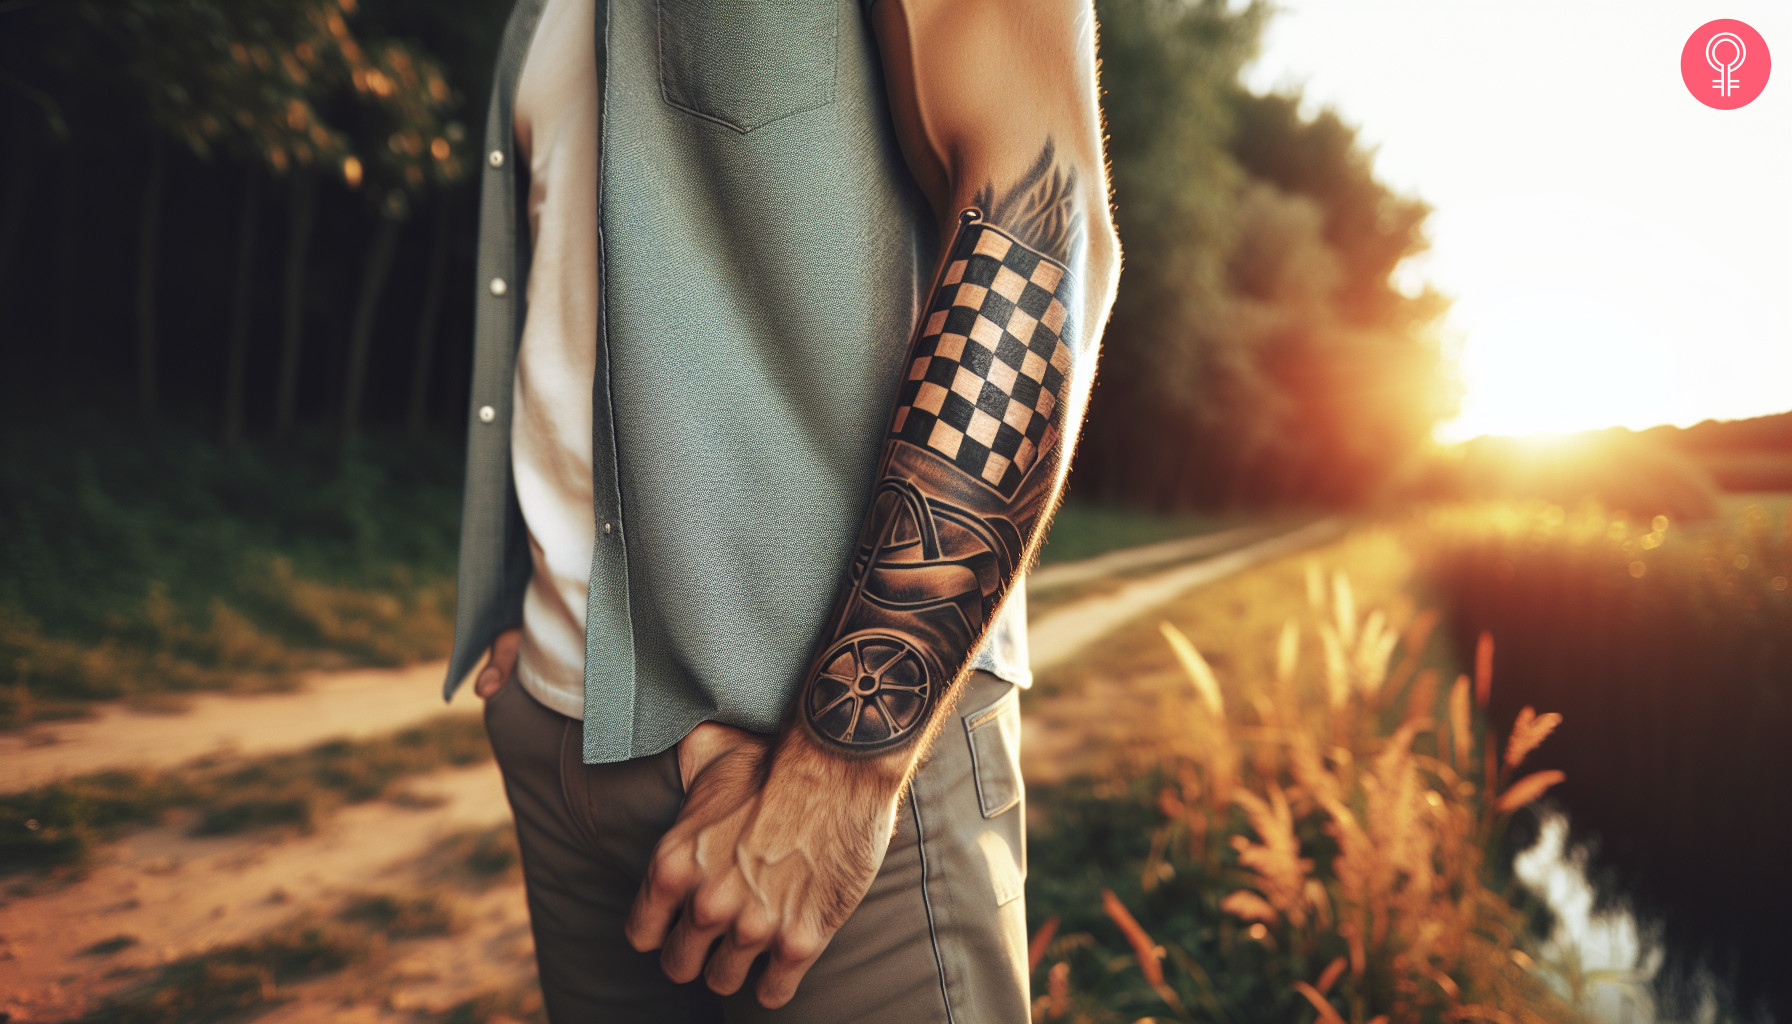 Racing checkered flag tattoo on a man’s forearm